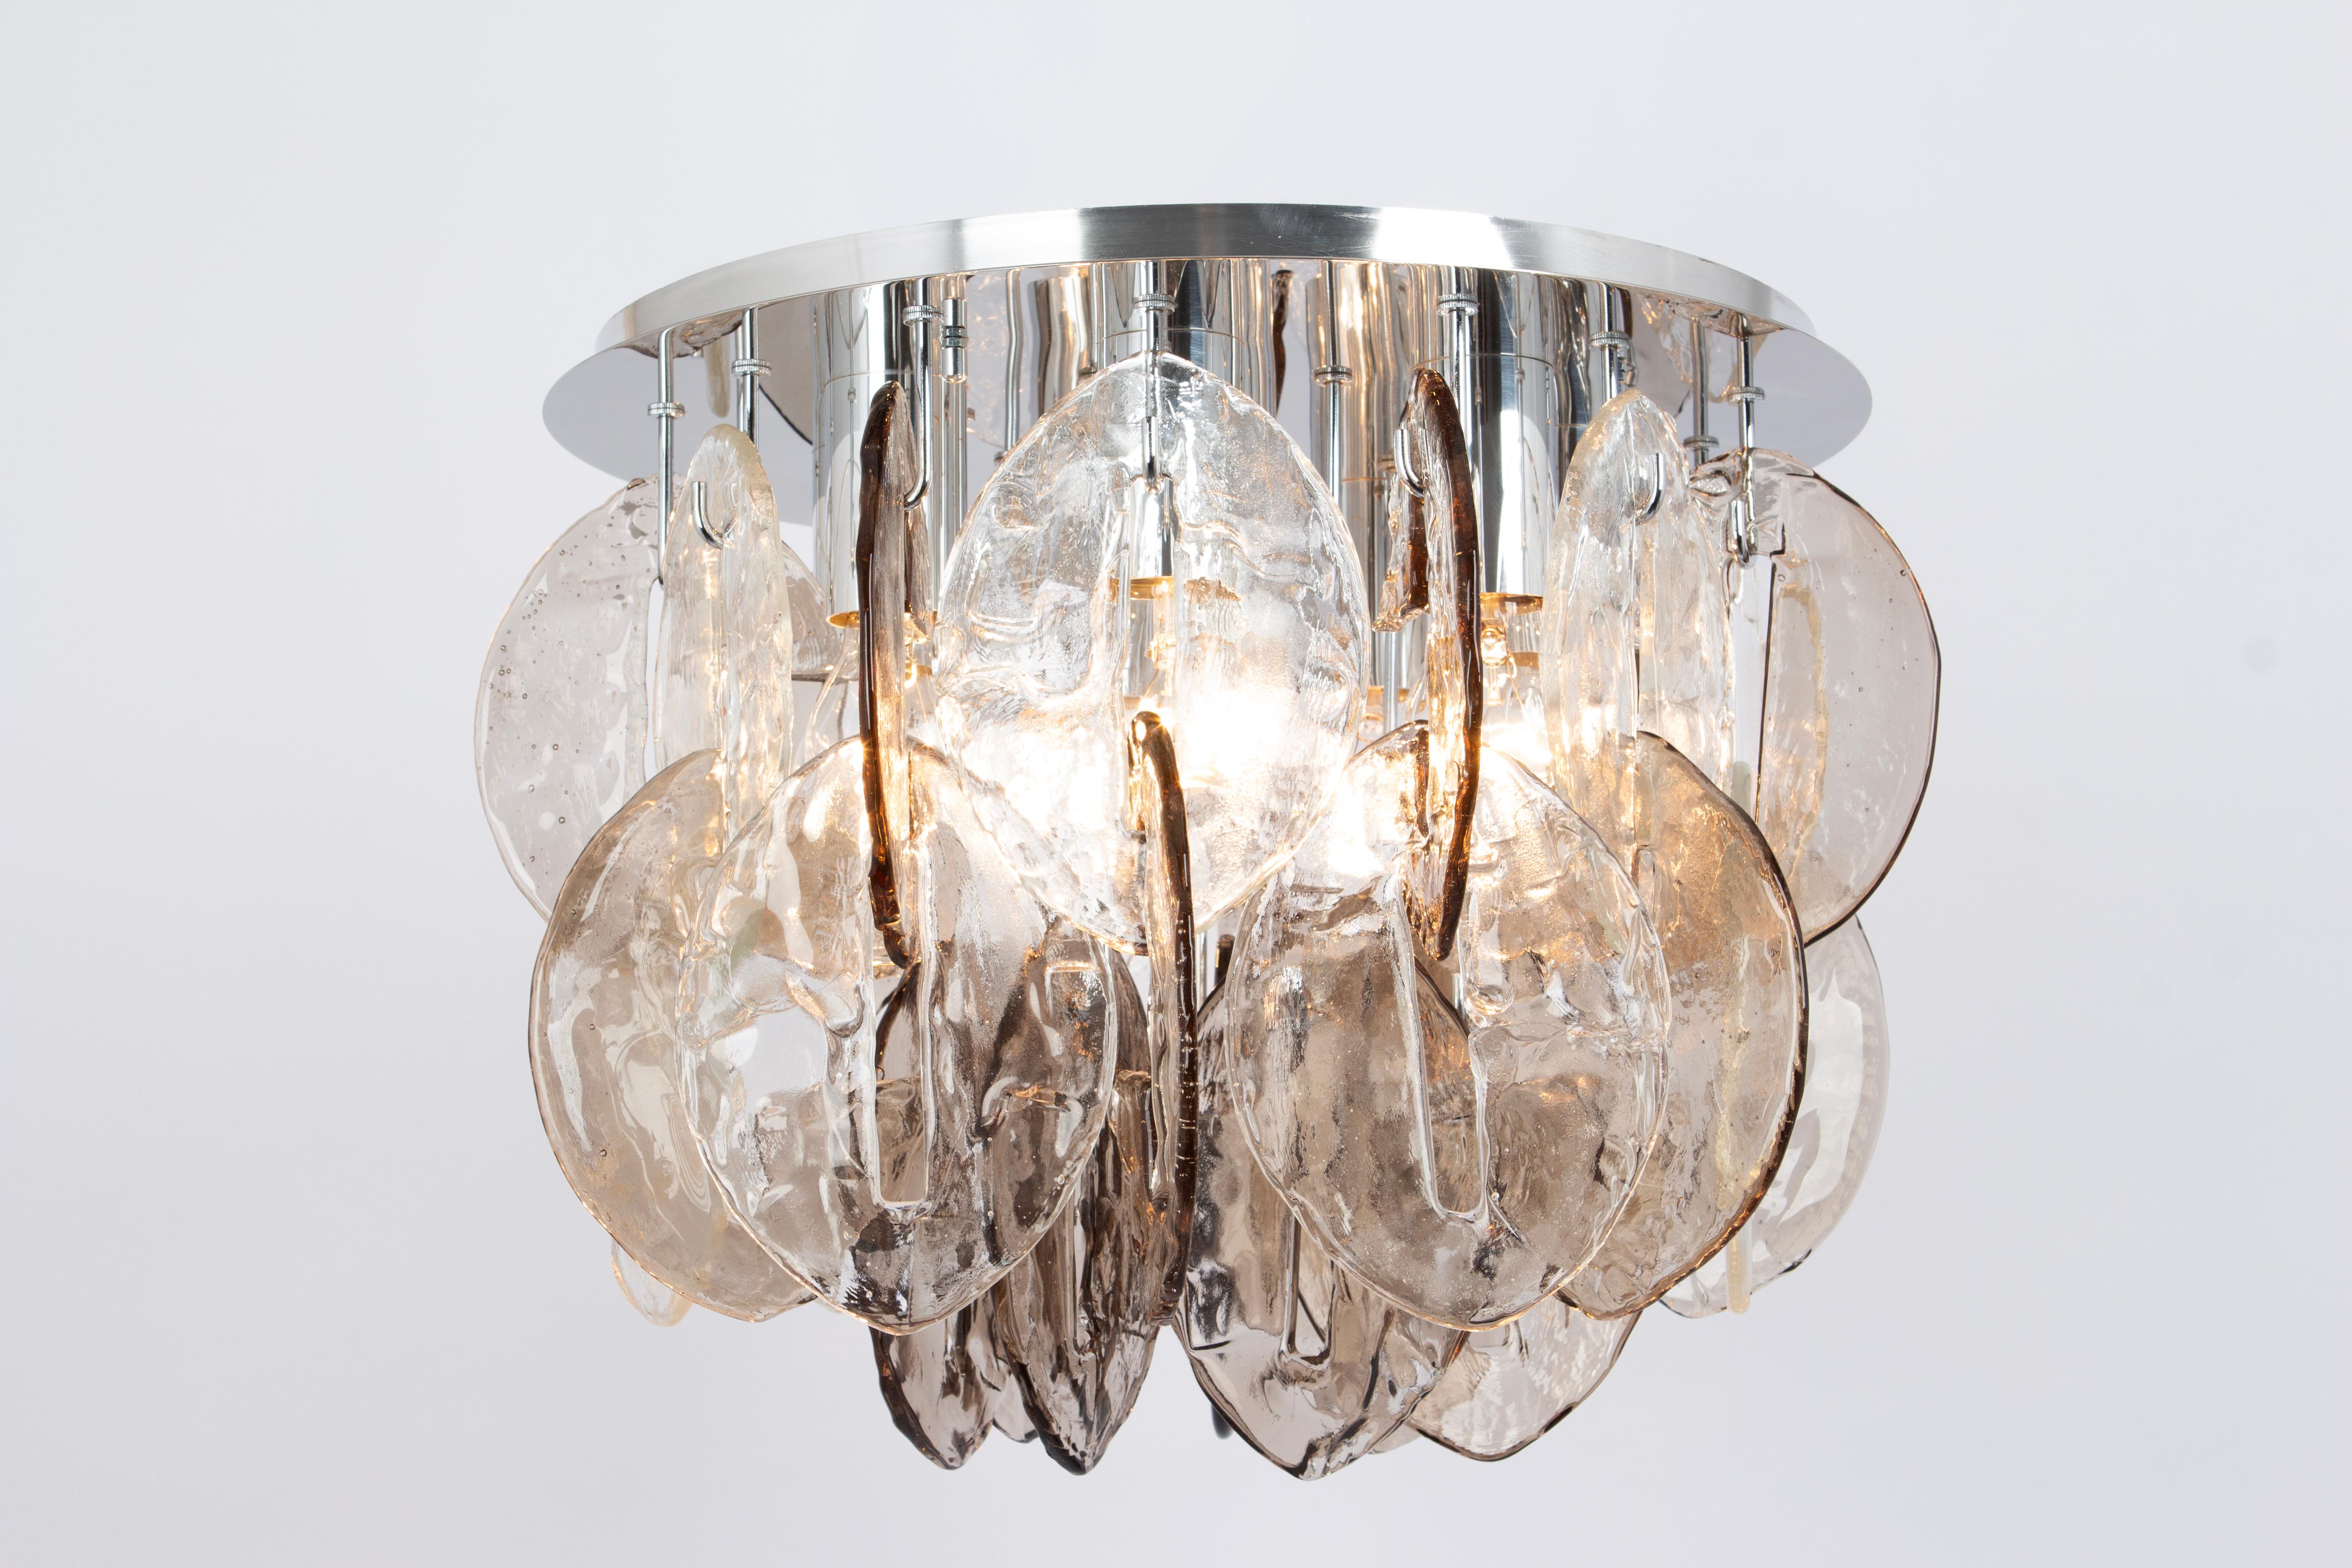 A stunning Large Murano glass Flush mount designed by Carlo Nason for Kalmar, Austria, manufactured in the 1970s. (Serie: CEO)
The Chandelier is composed of 35 thick textured glass elements attached to a chrome metal frame.
Elevate your surroundings